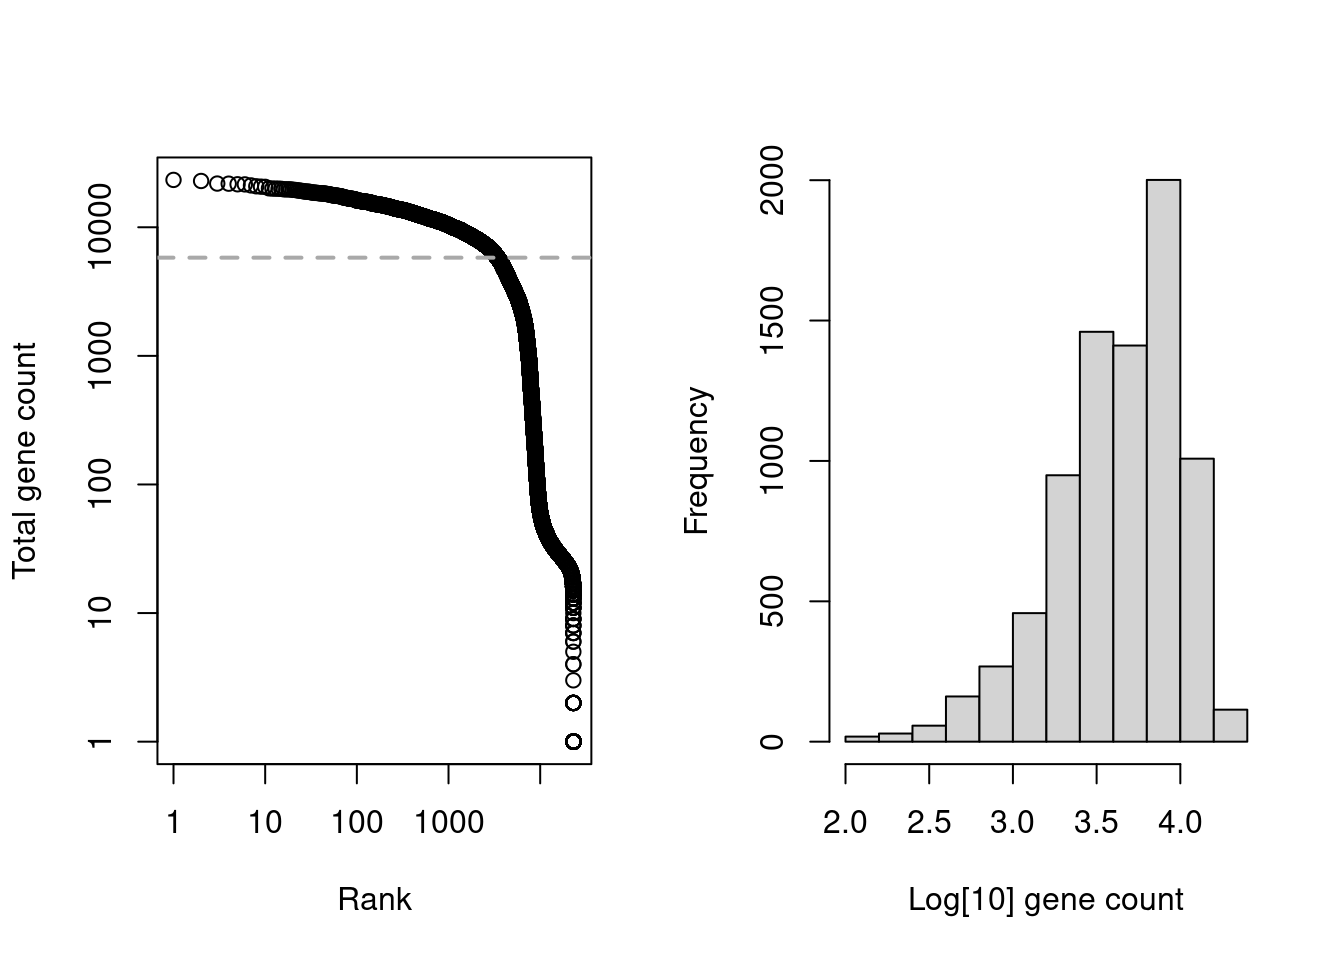 Cell-calling statistics from running `emptyDrops()` on the gene count in the cell line mixture data. Left: Barcode rank plot with the estimated knee point in grey. Right: distribution of log-total counts for libraries identified as cells.